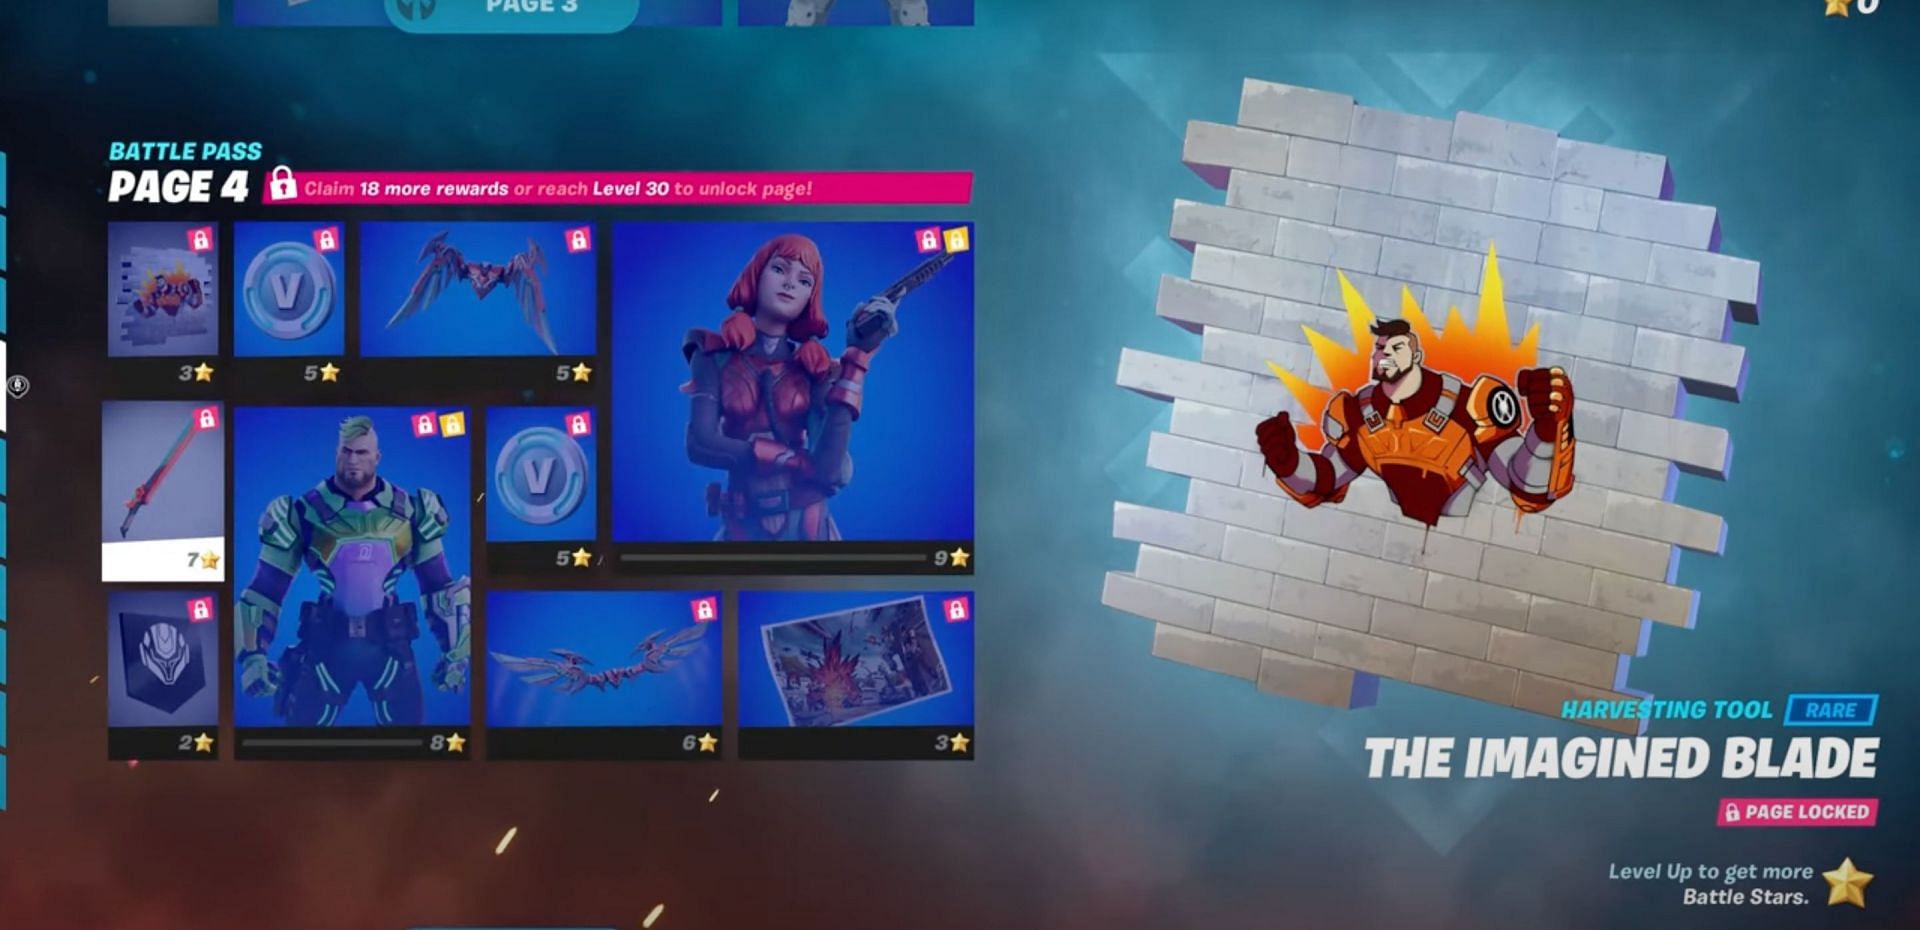 Page 4 of the Battle Pass (Image via Epic Games)